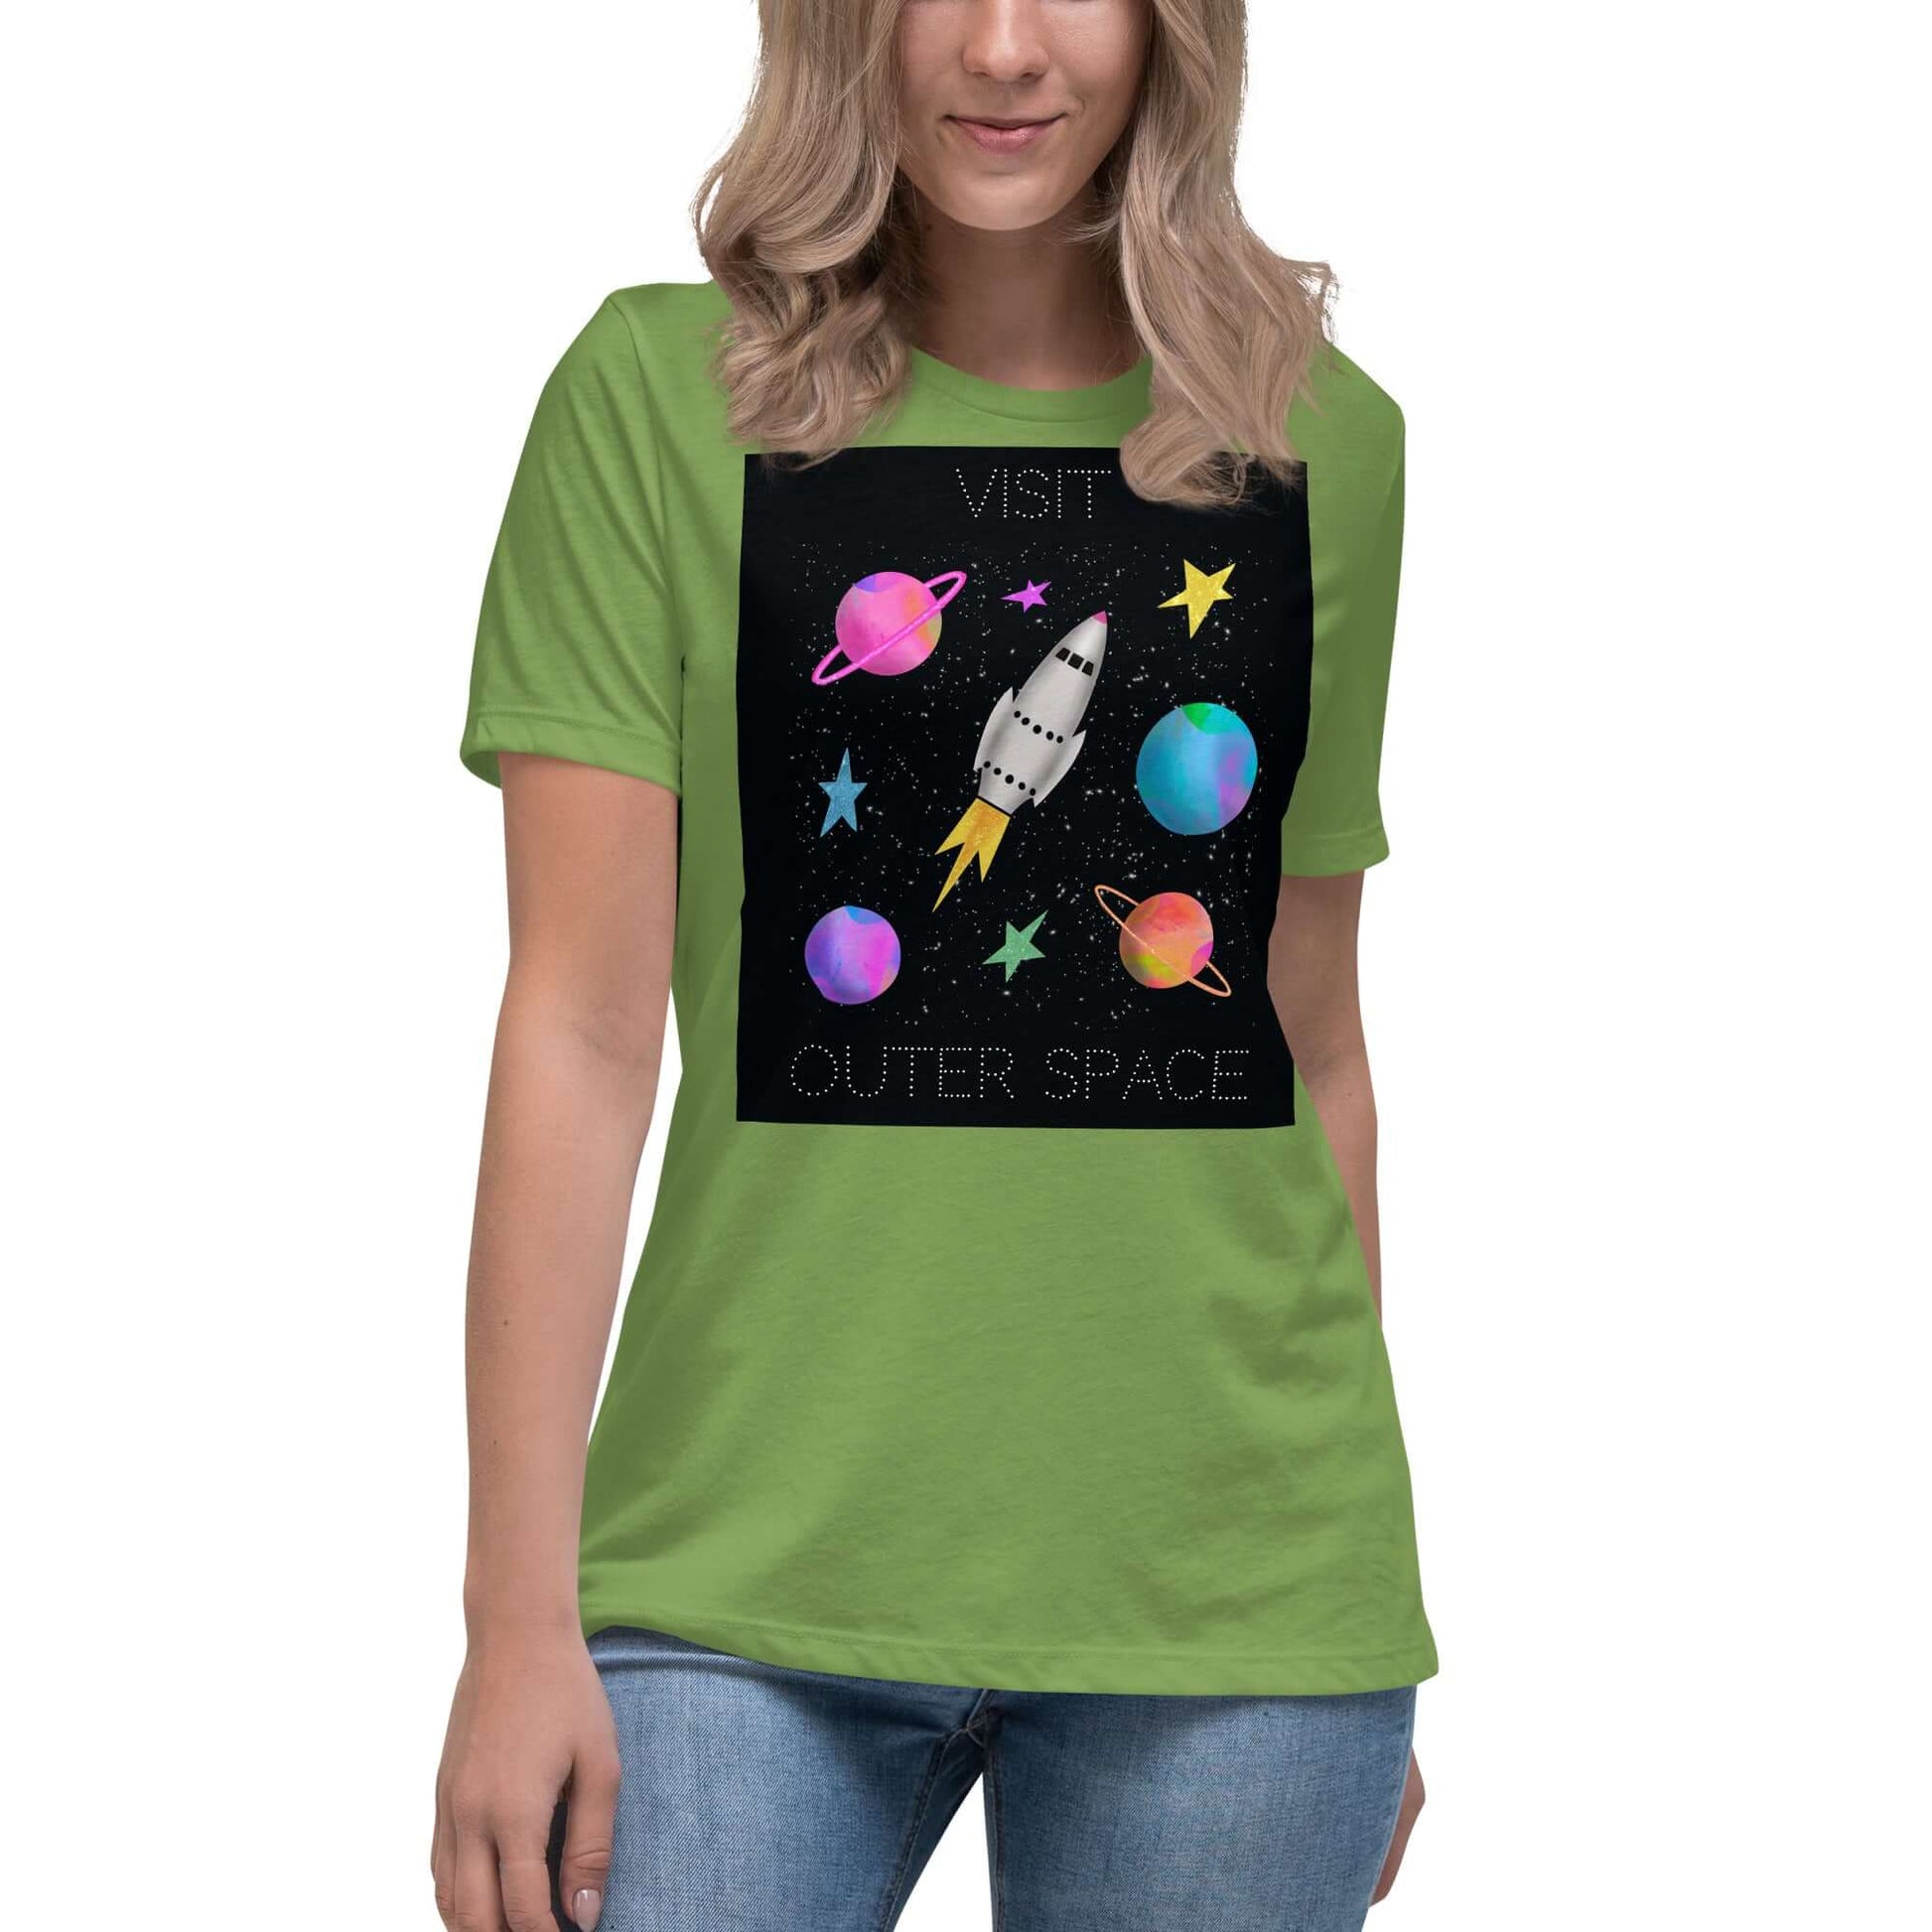 Whimsical Space Rocket with Colorful Planets and Stars on Black Background with Text “Visit Outer Space” Women’s Short Sleeve Tee in Leaf Green